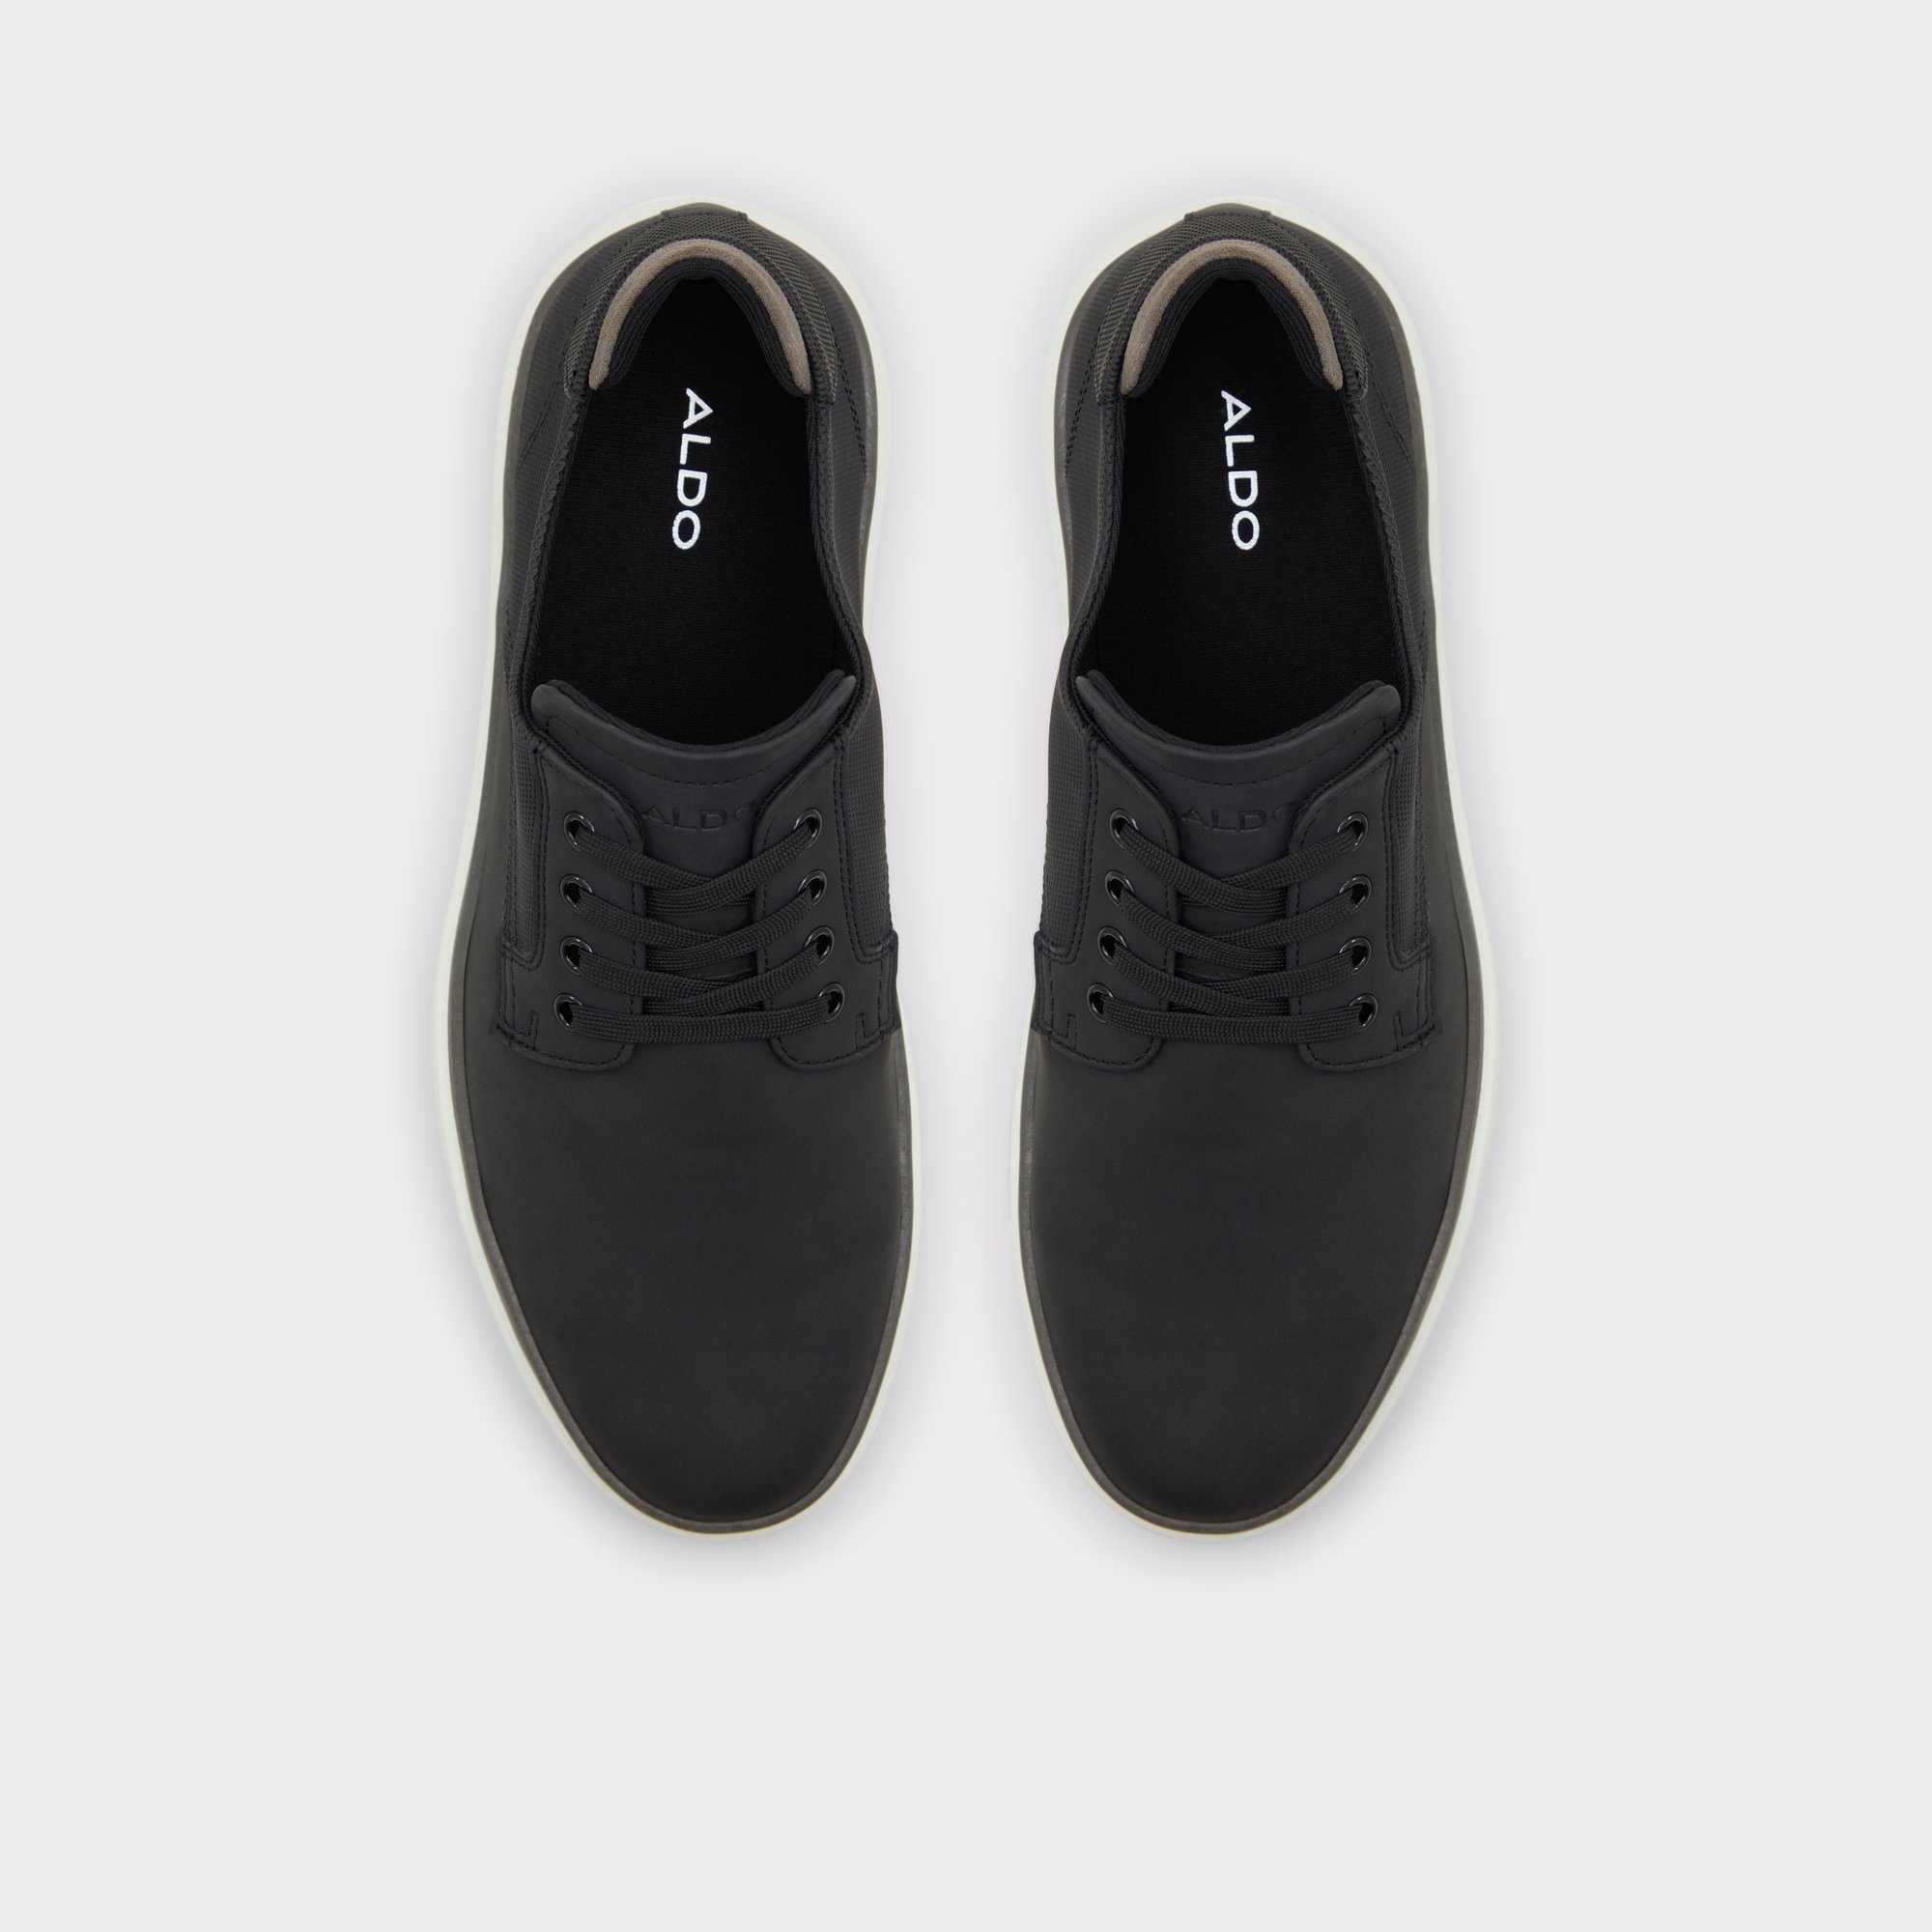 Grouville Black Synthetic Smooth Men's Oxfords & Lace-ups | ALDO US